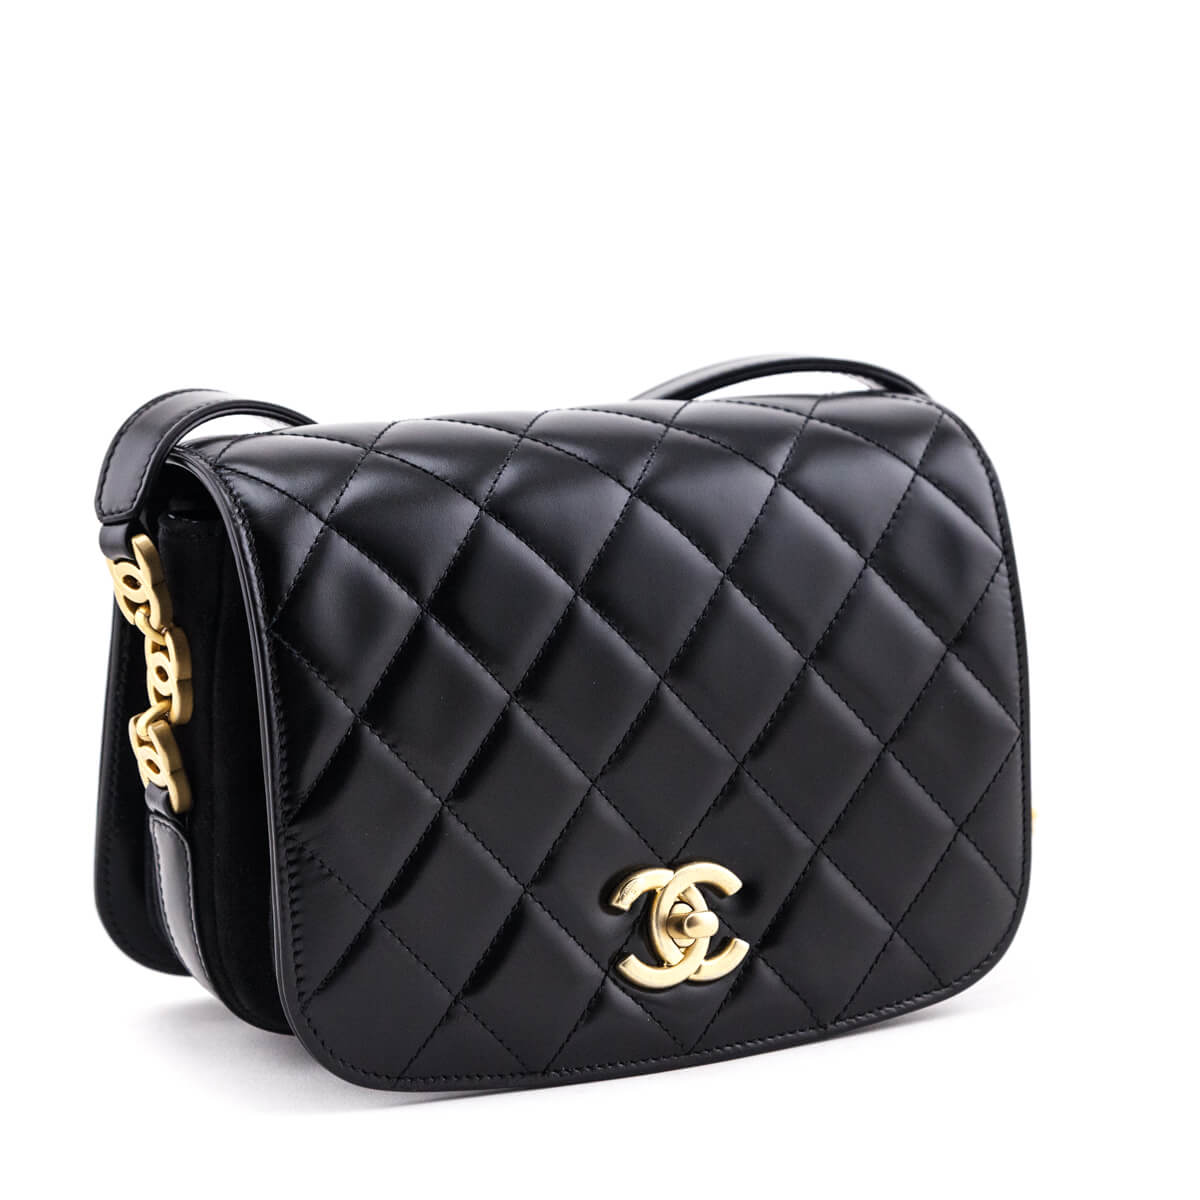 Chanel Black Quilted Shiny Calfskin & Suede Mini Messenger Bag - Love that Bag etc - Preowned Authentic Designer Handbags & Preloved Fashions